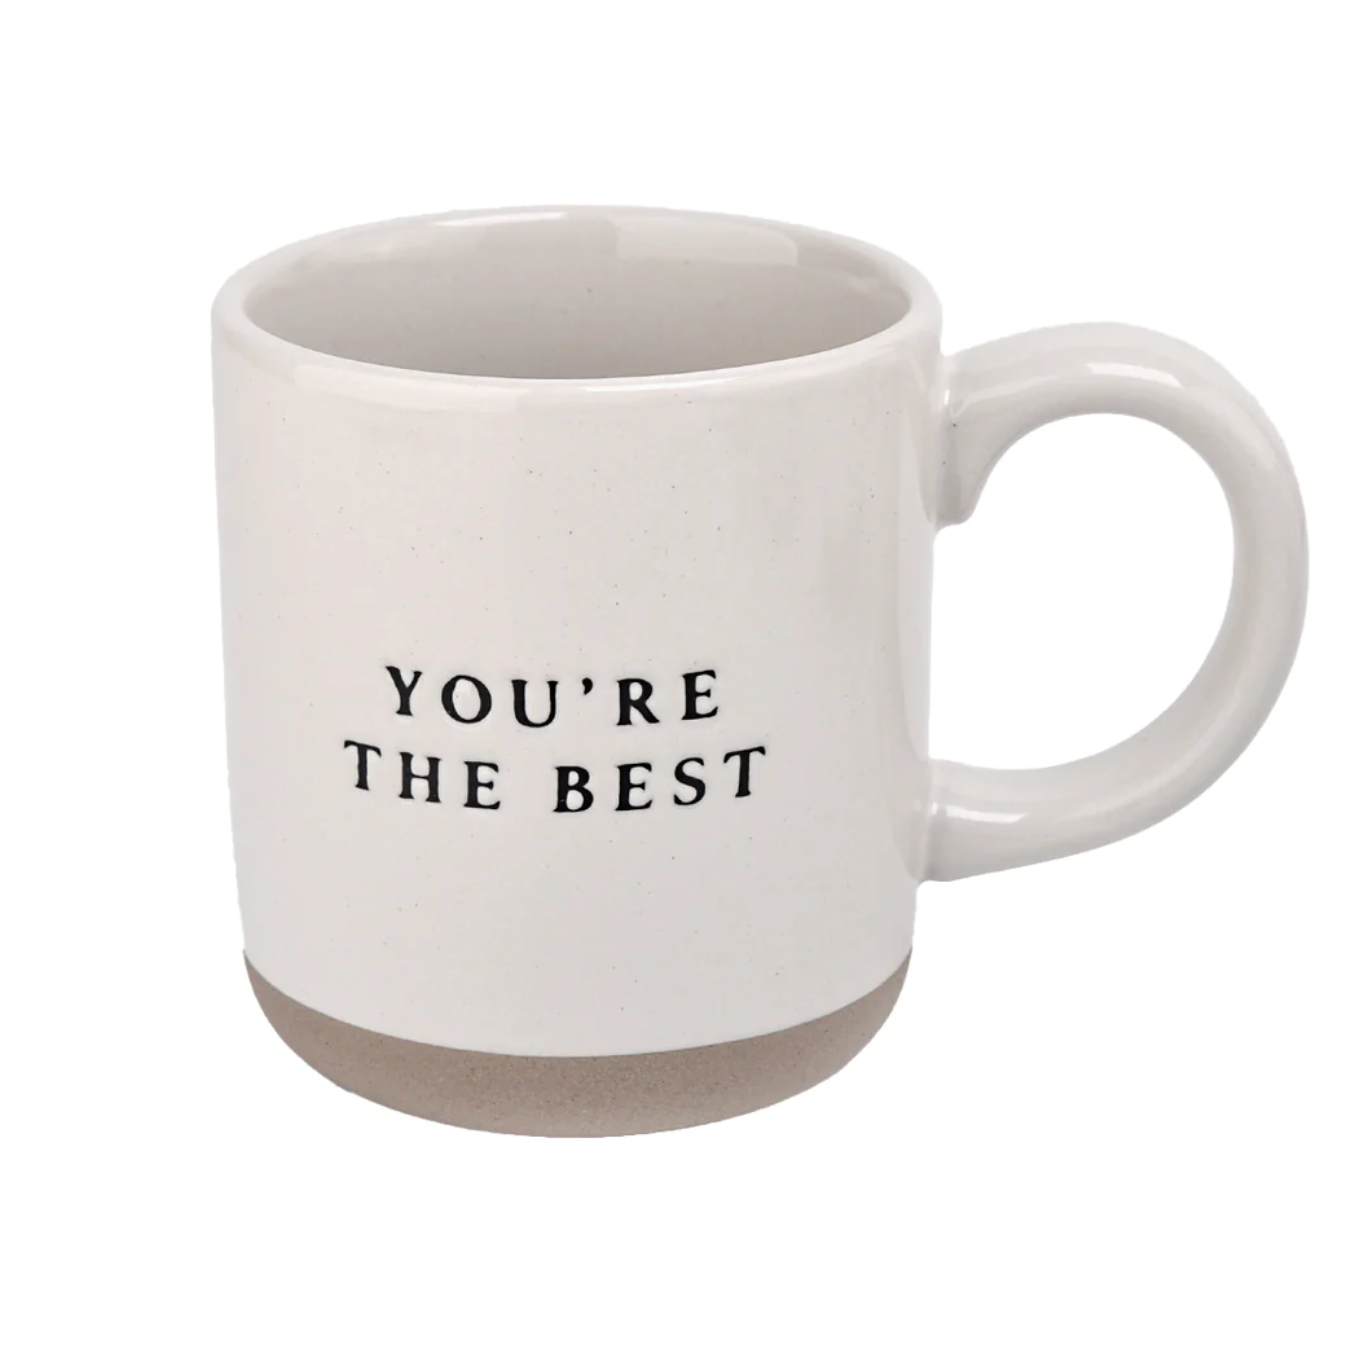 You're the best - Tasse